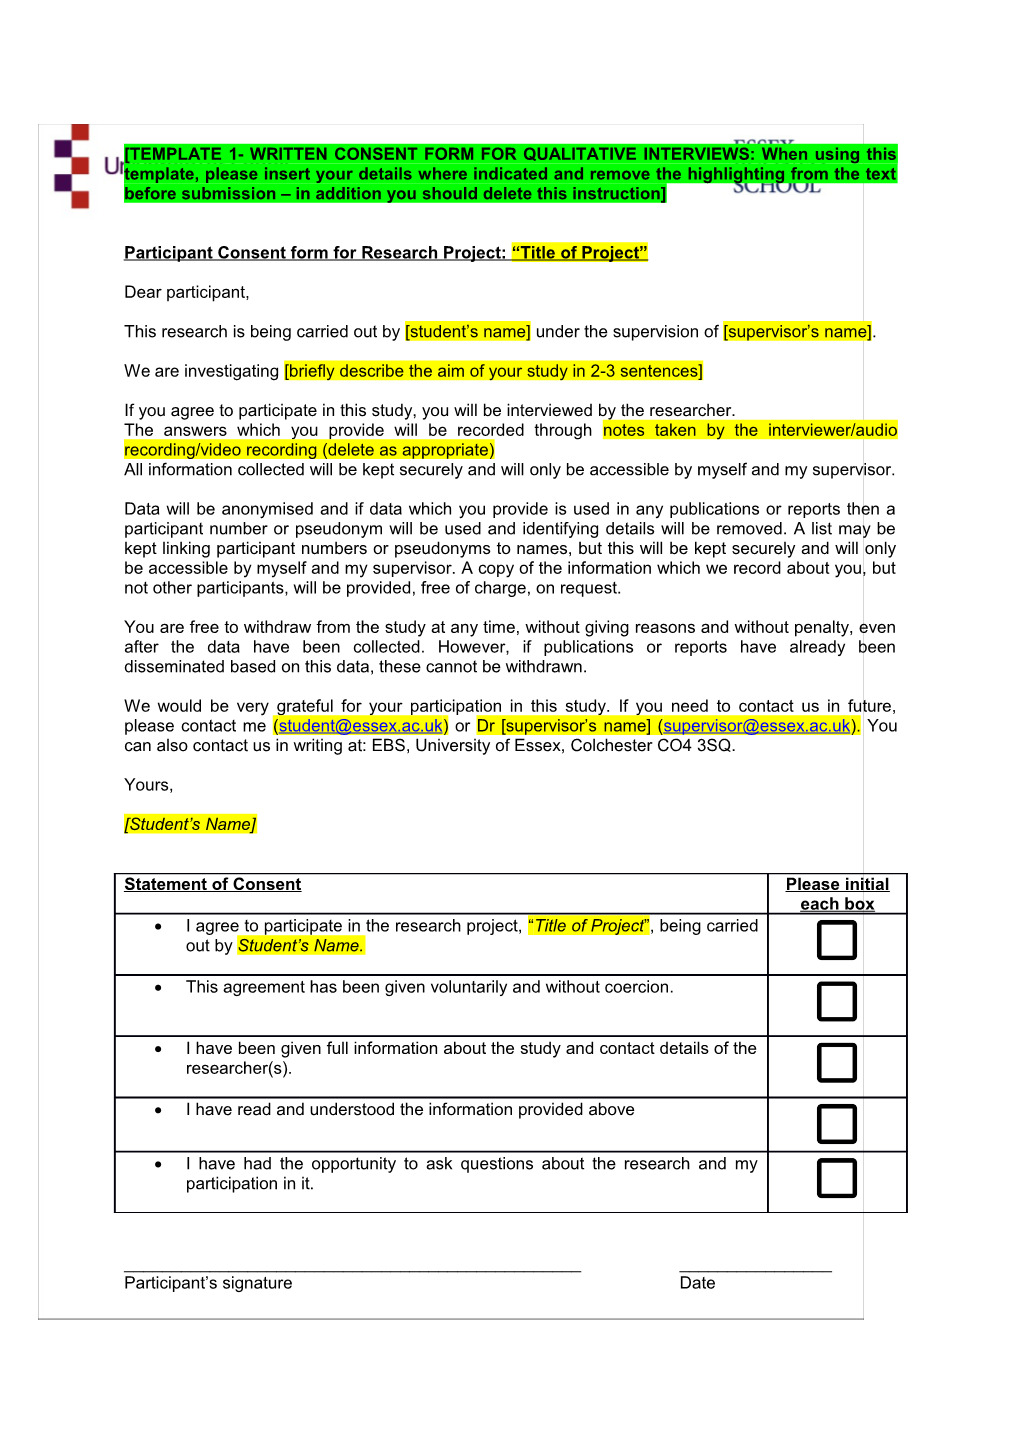 Participant Consent Form for Research Project: Title of Project